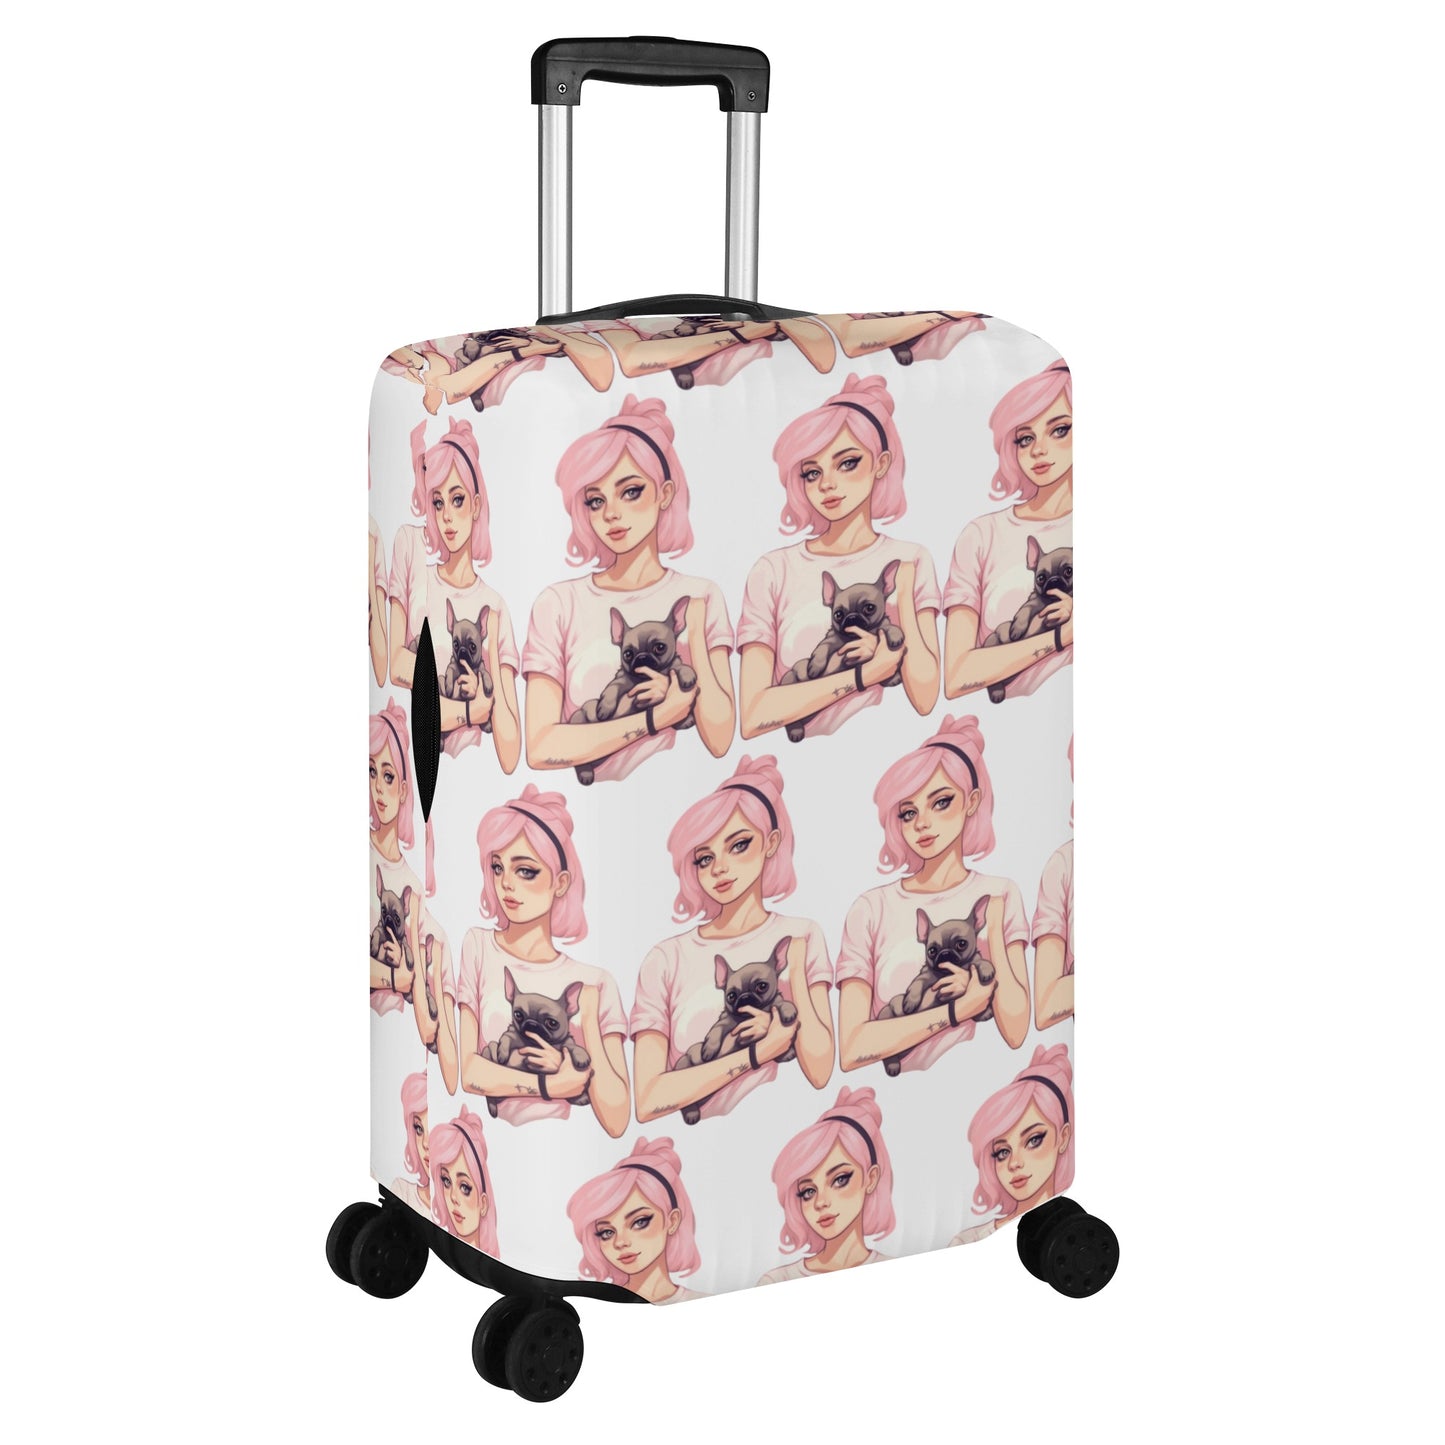 Charlie - Luggage Cover